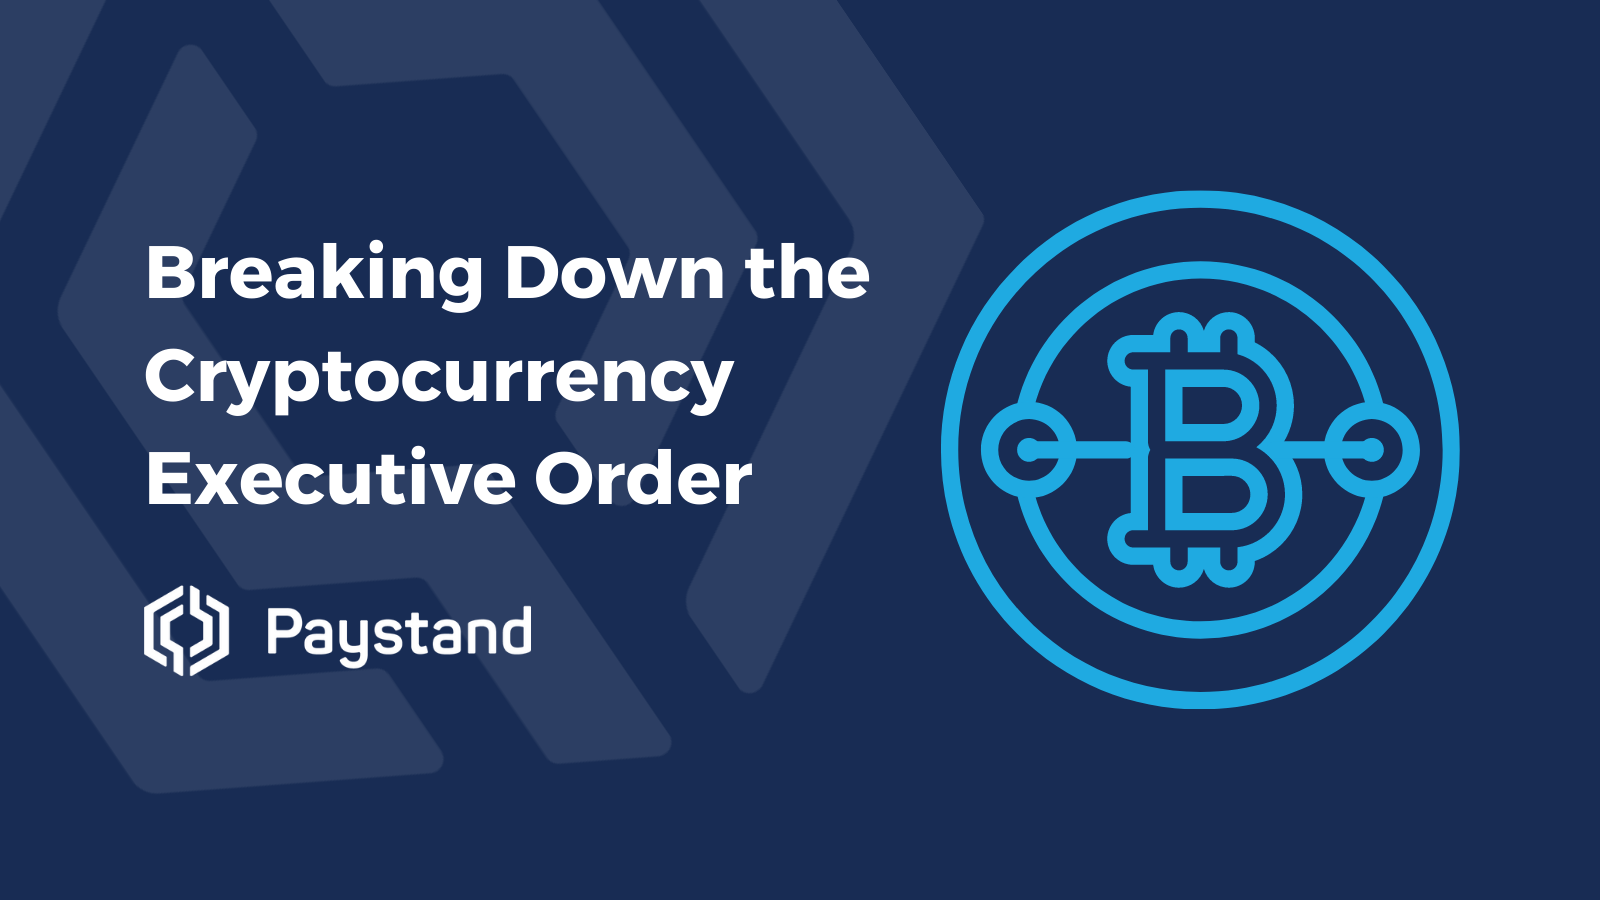 Breaking Down the Cryptocurrency Executive Order